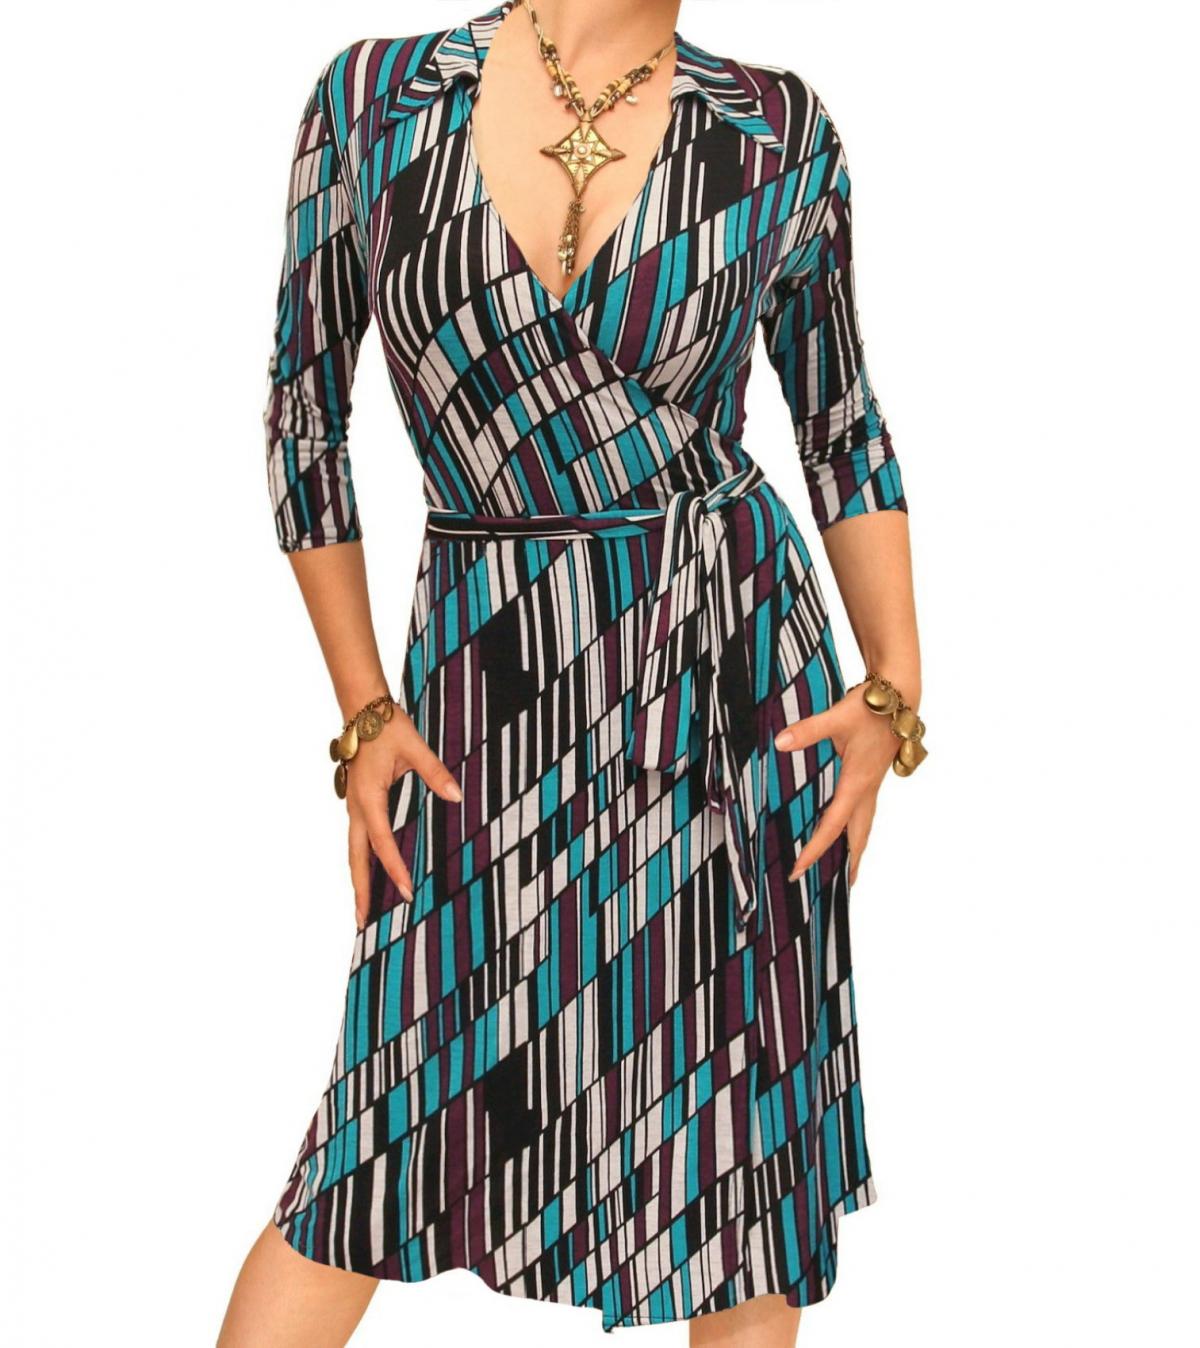 Teal and Purple Printed Collared Wrap Dress